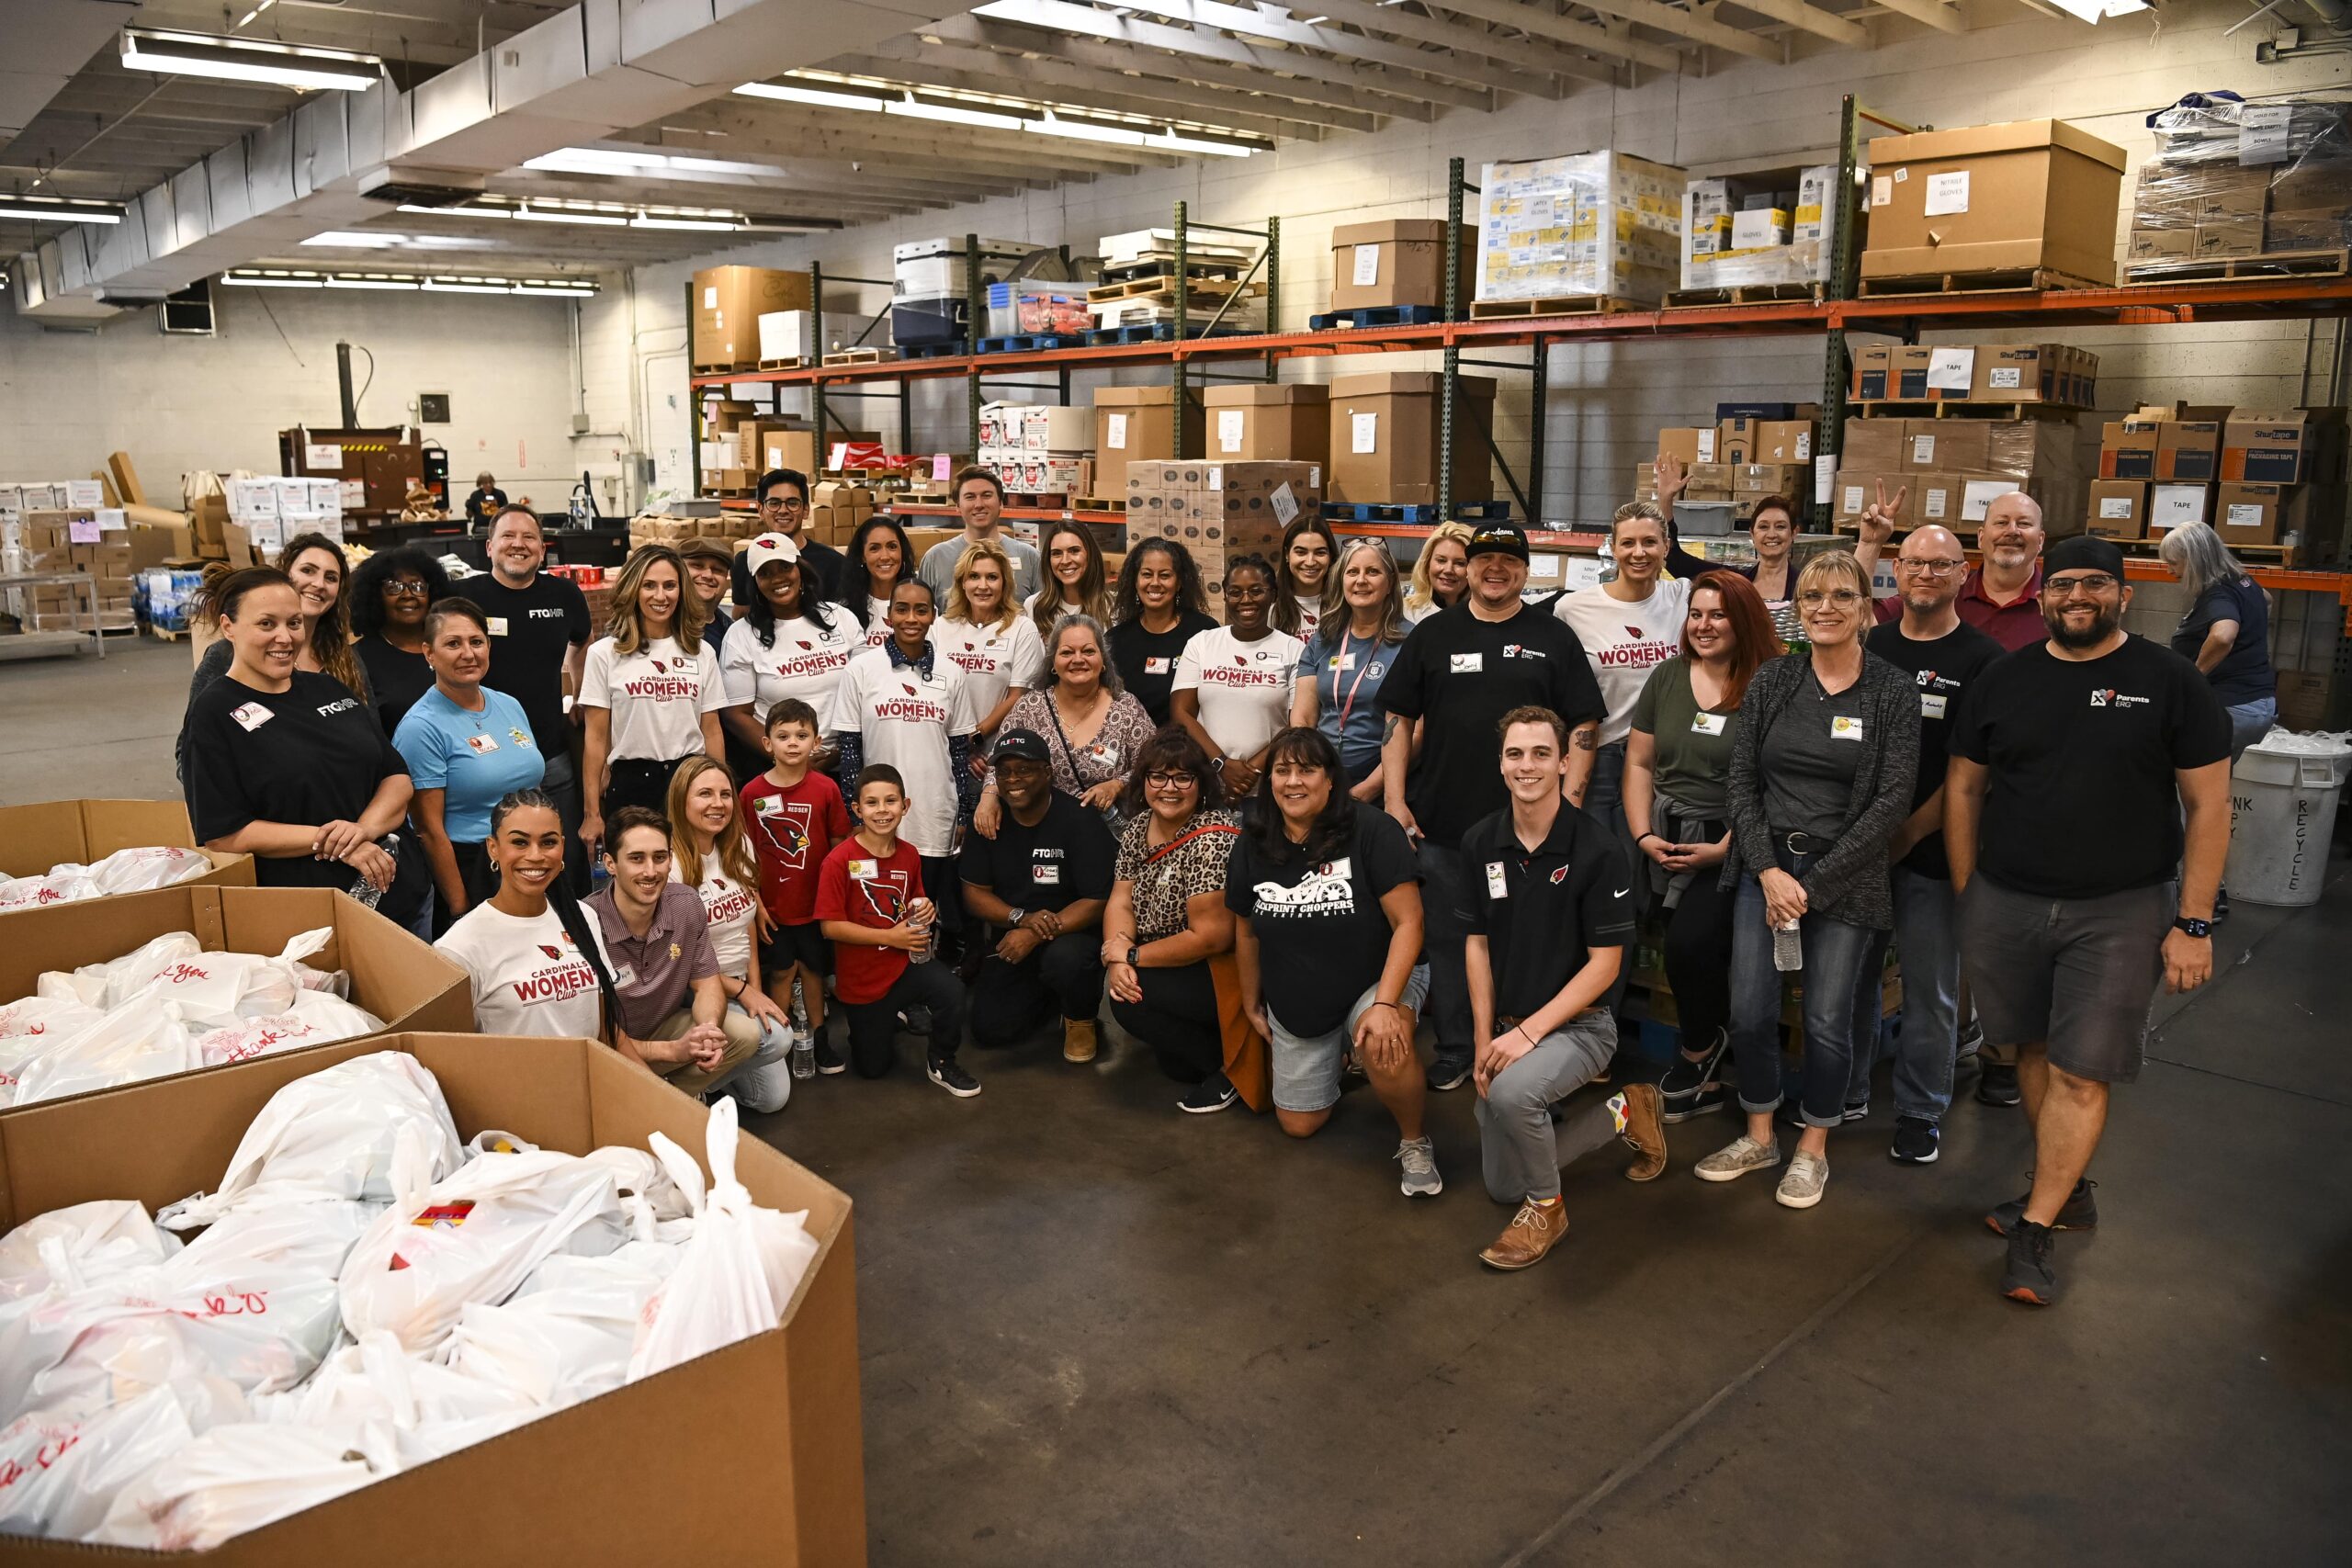 Flex Technology Group Joins with Feeding America to Help Fight Food Insecurity This Holiday Season